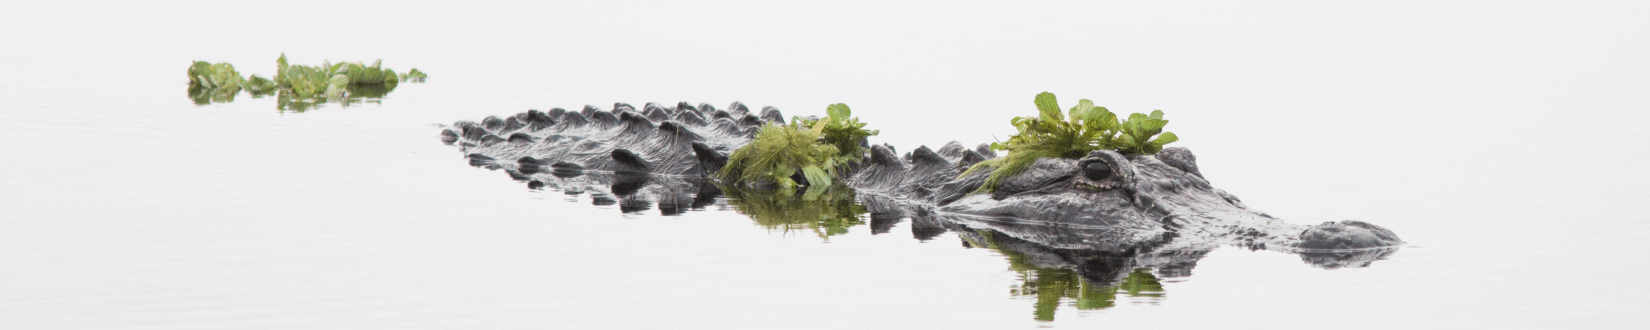 an alligator swims through a water, partially submerged and cloaked in vegetation